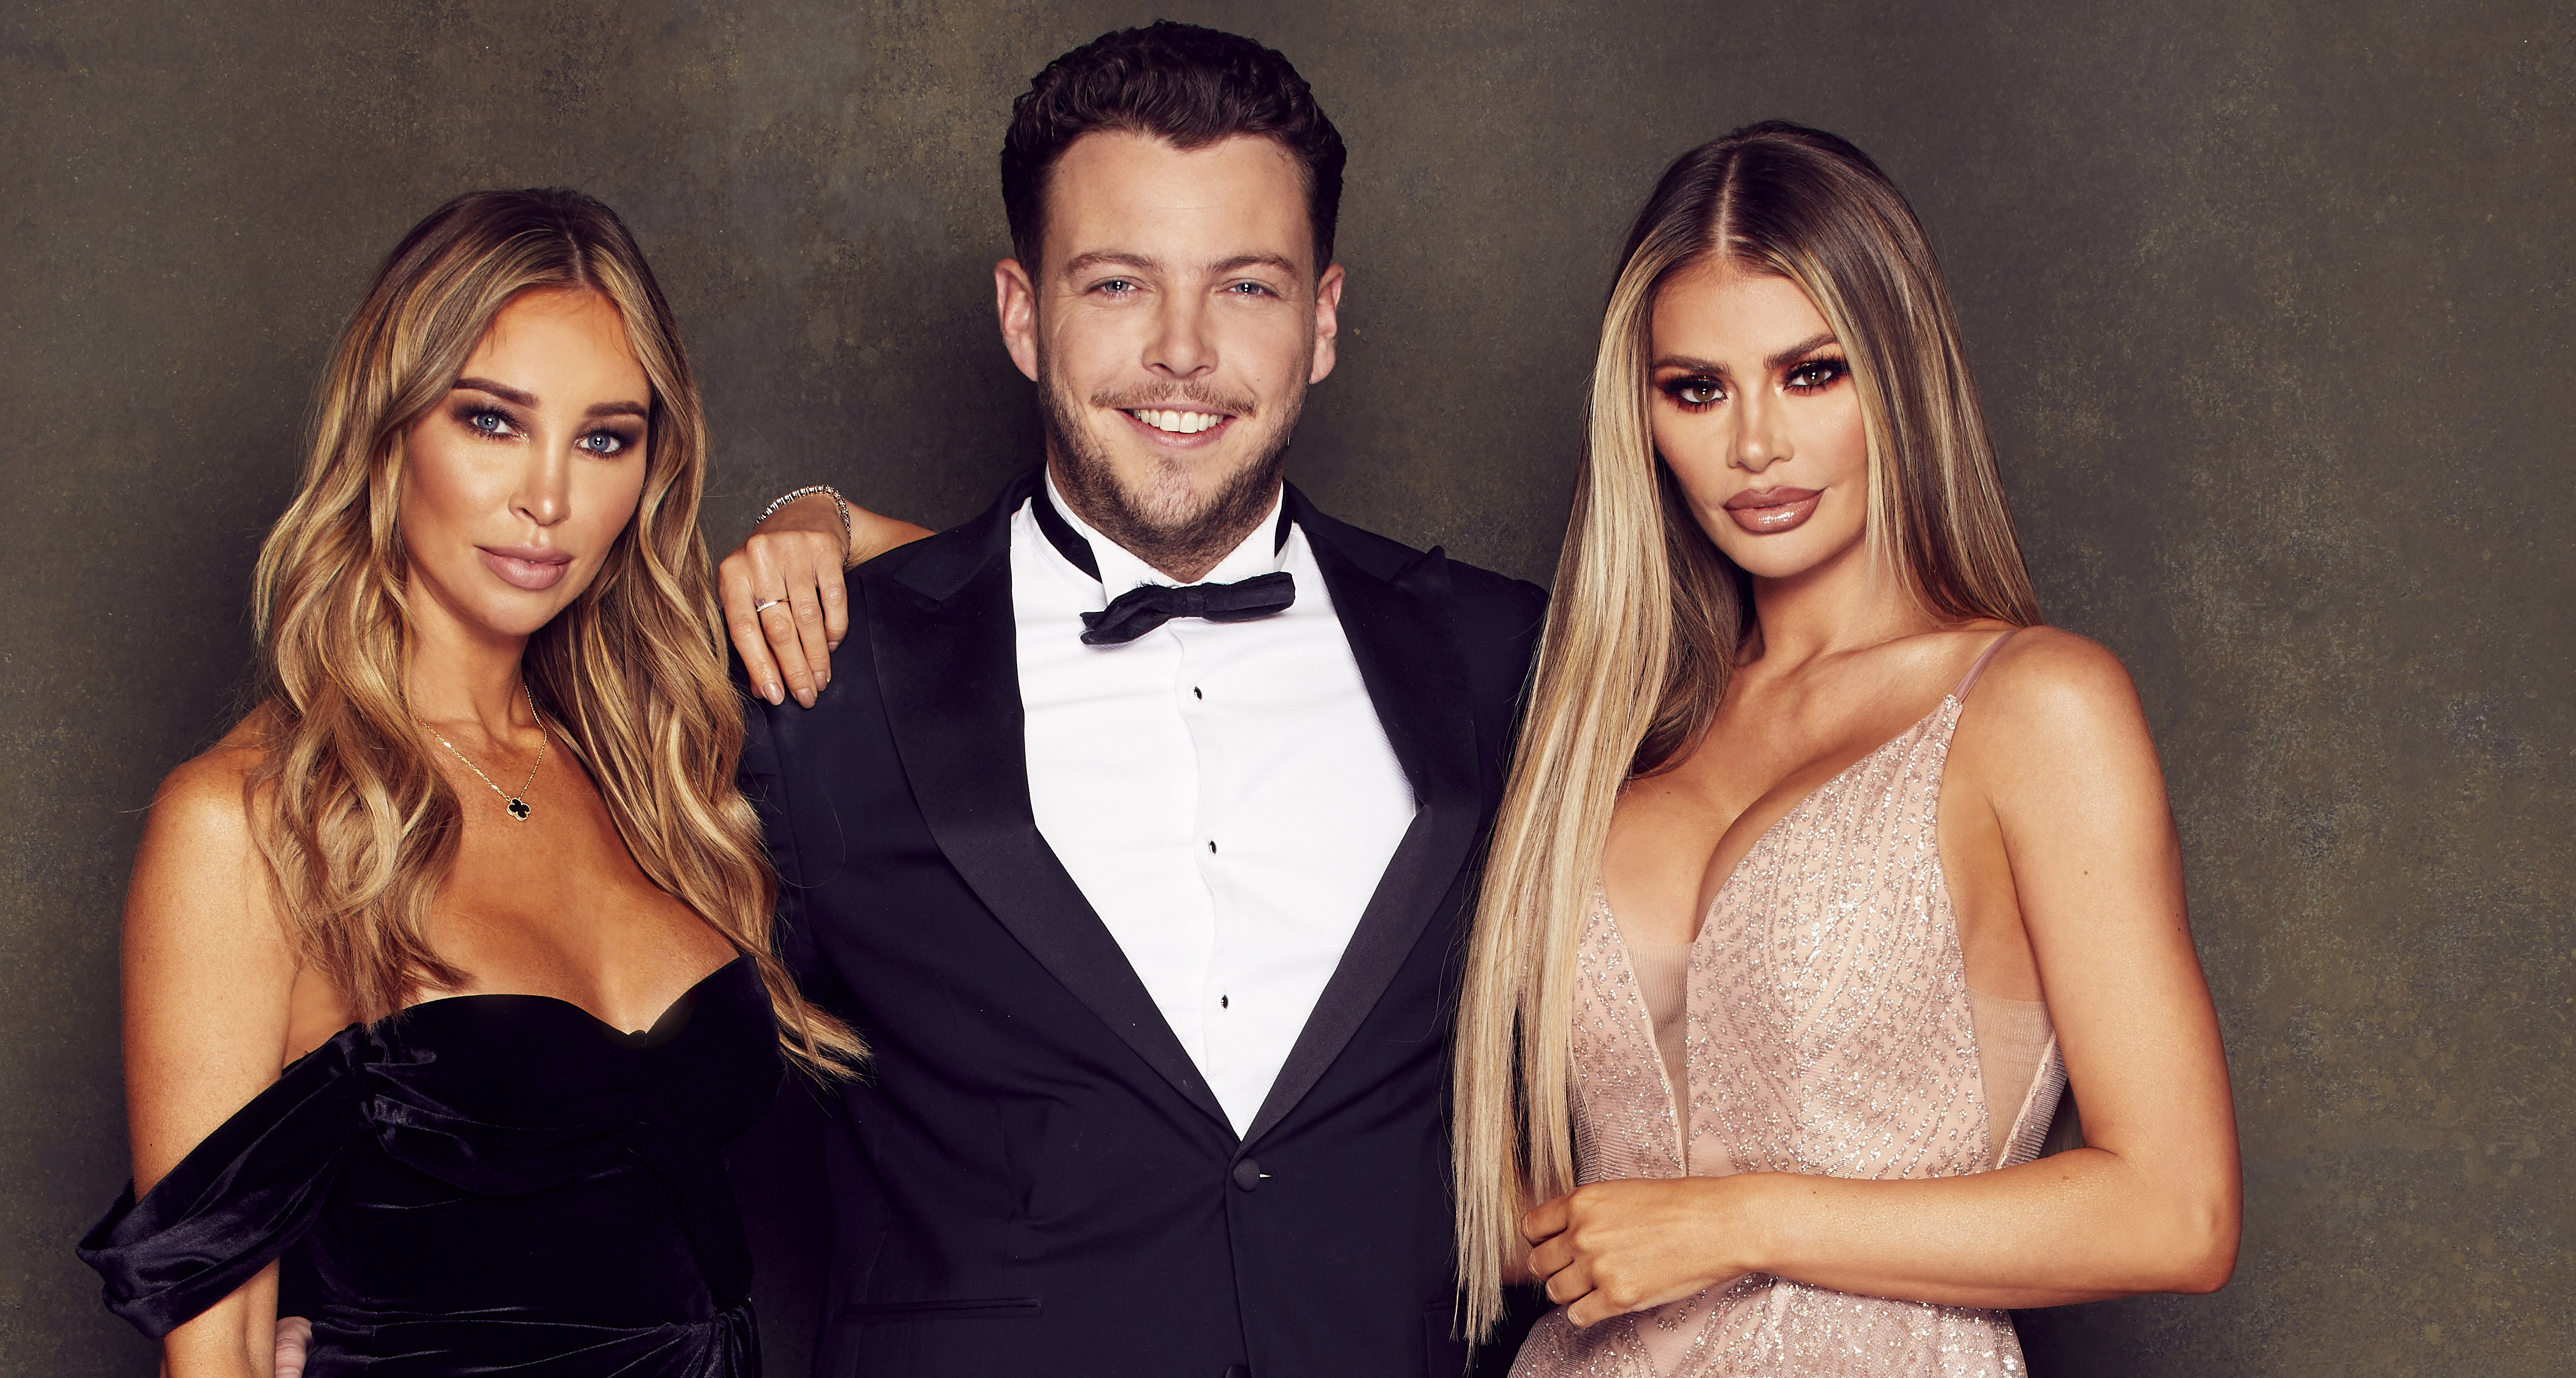 The Only Way is Essex season 25: Confirmed start date in September!